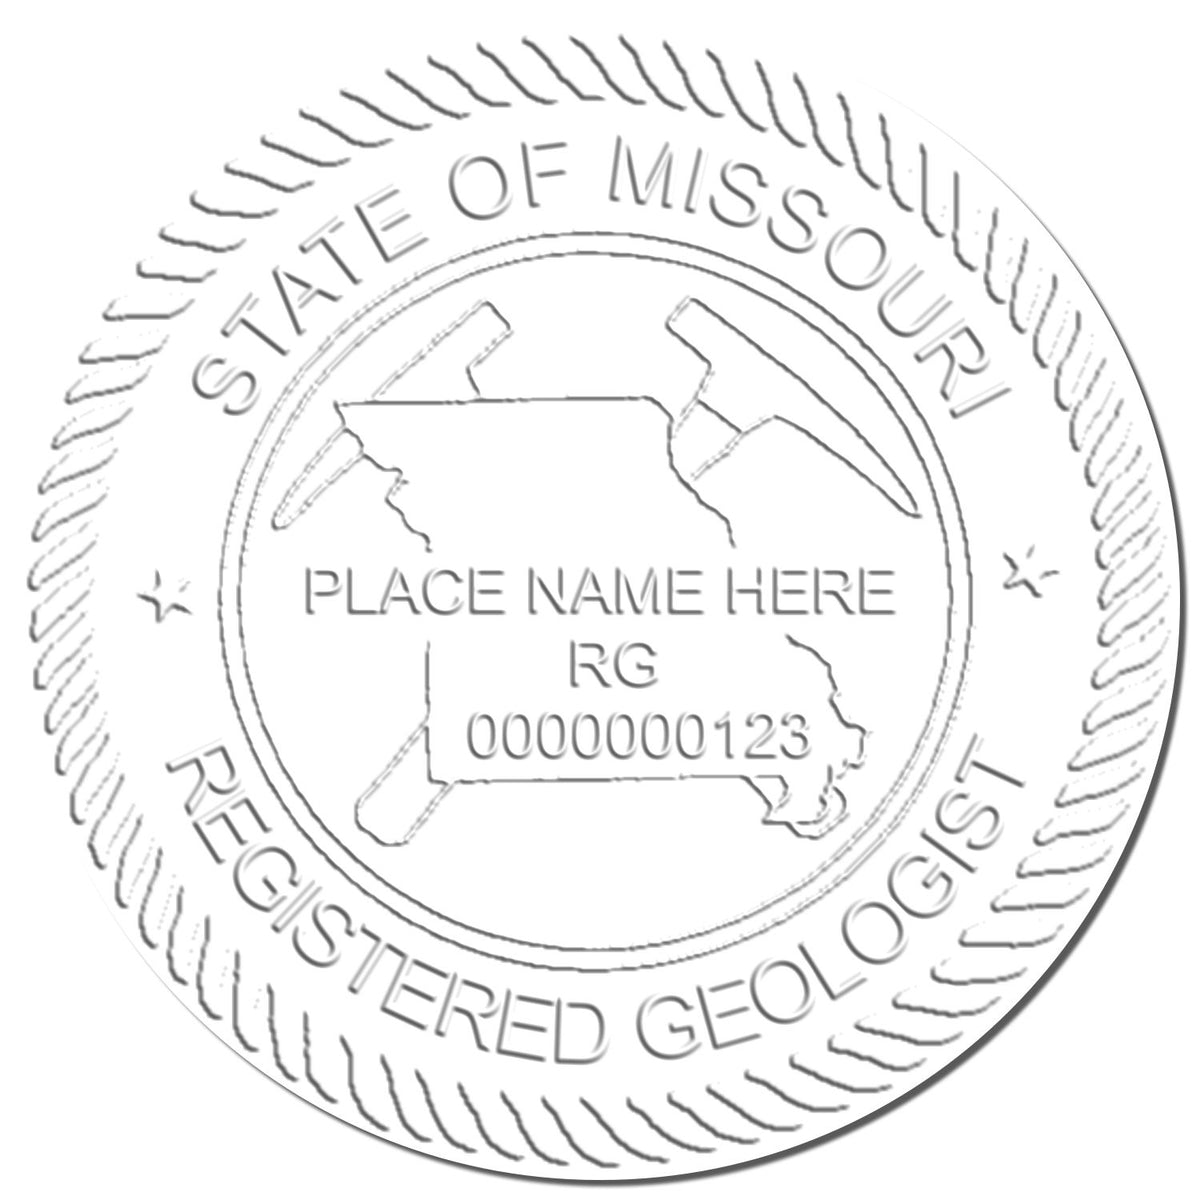 A stamped imprint of the Long Reach Missouri Geology Seal in this stylish lifestyle photo, setting the tone for a unique and personalized product.